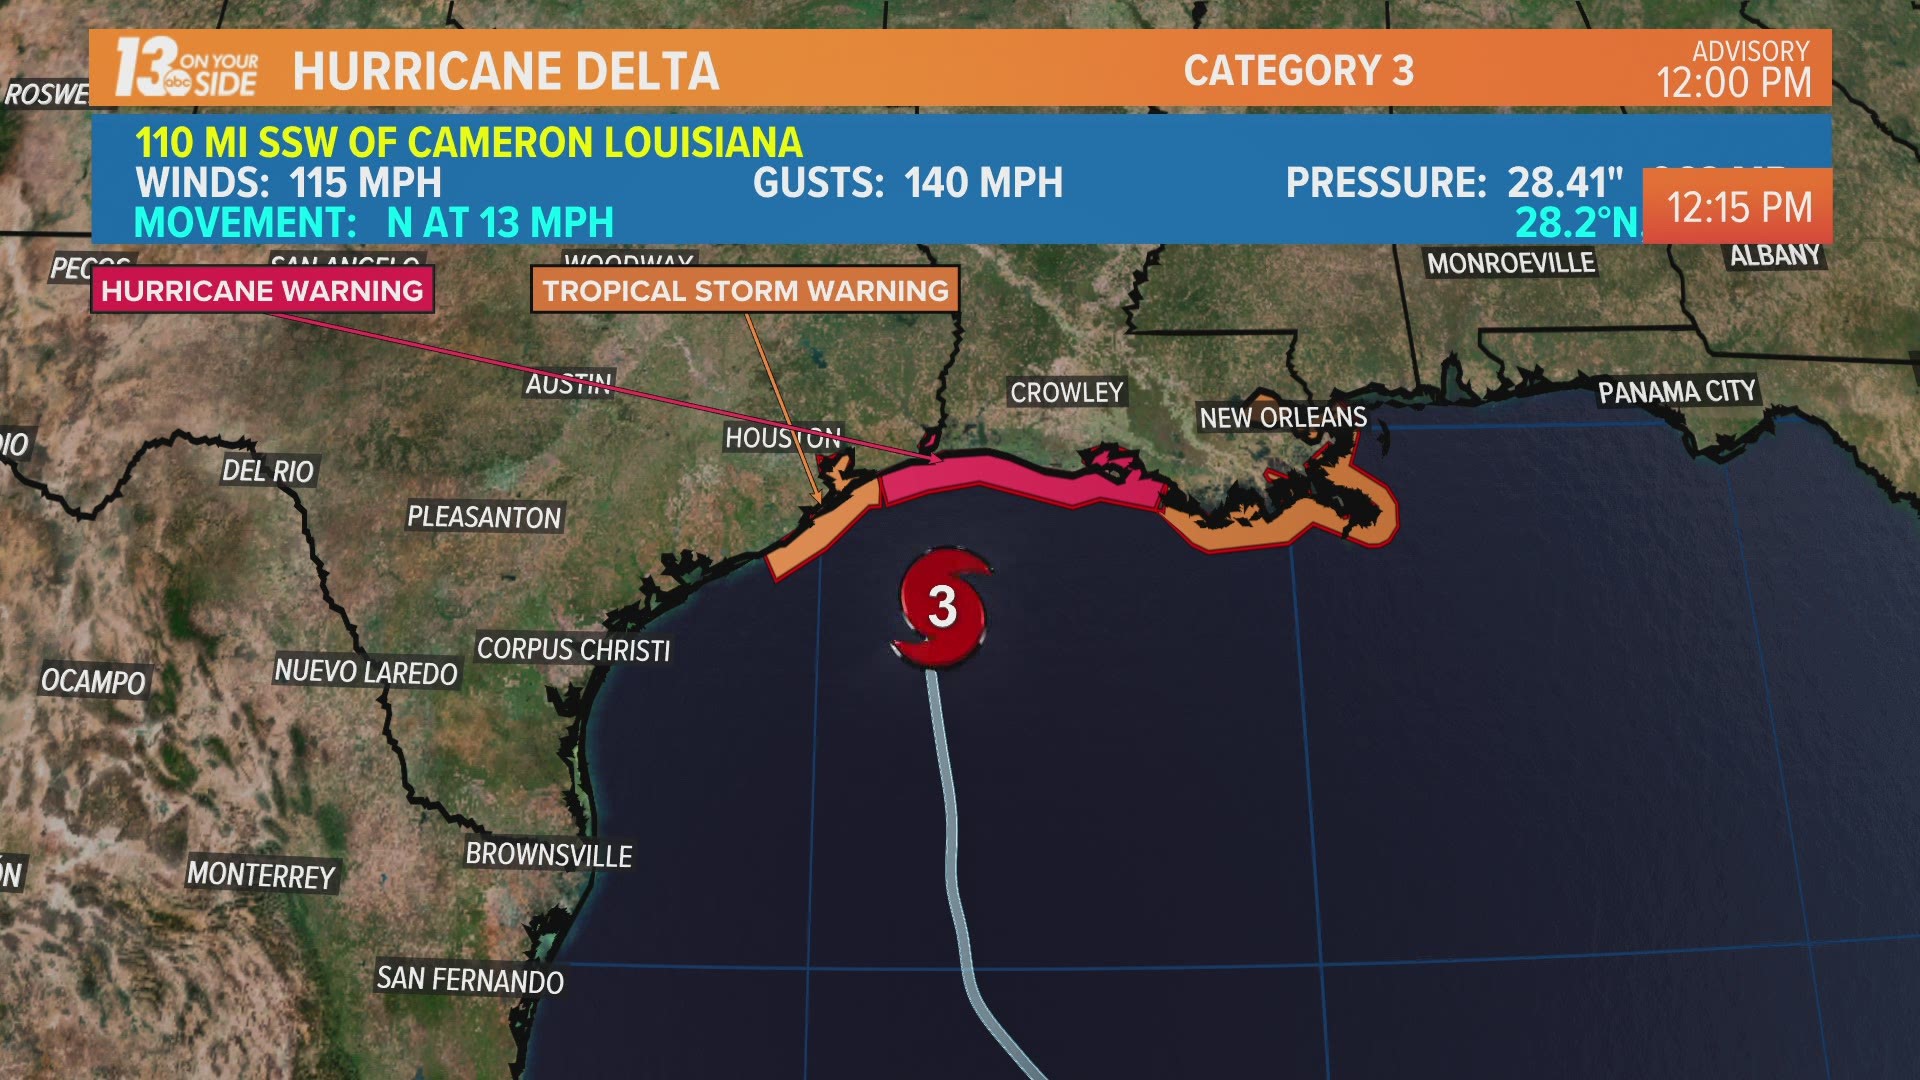 Hurricane Delta is expected to make landfall later today. Meteorologist Michael Behrens has the latest details.